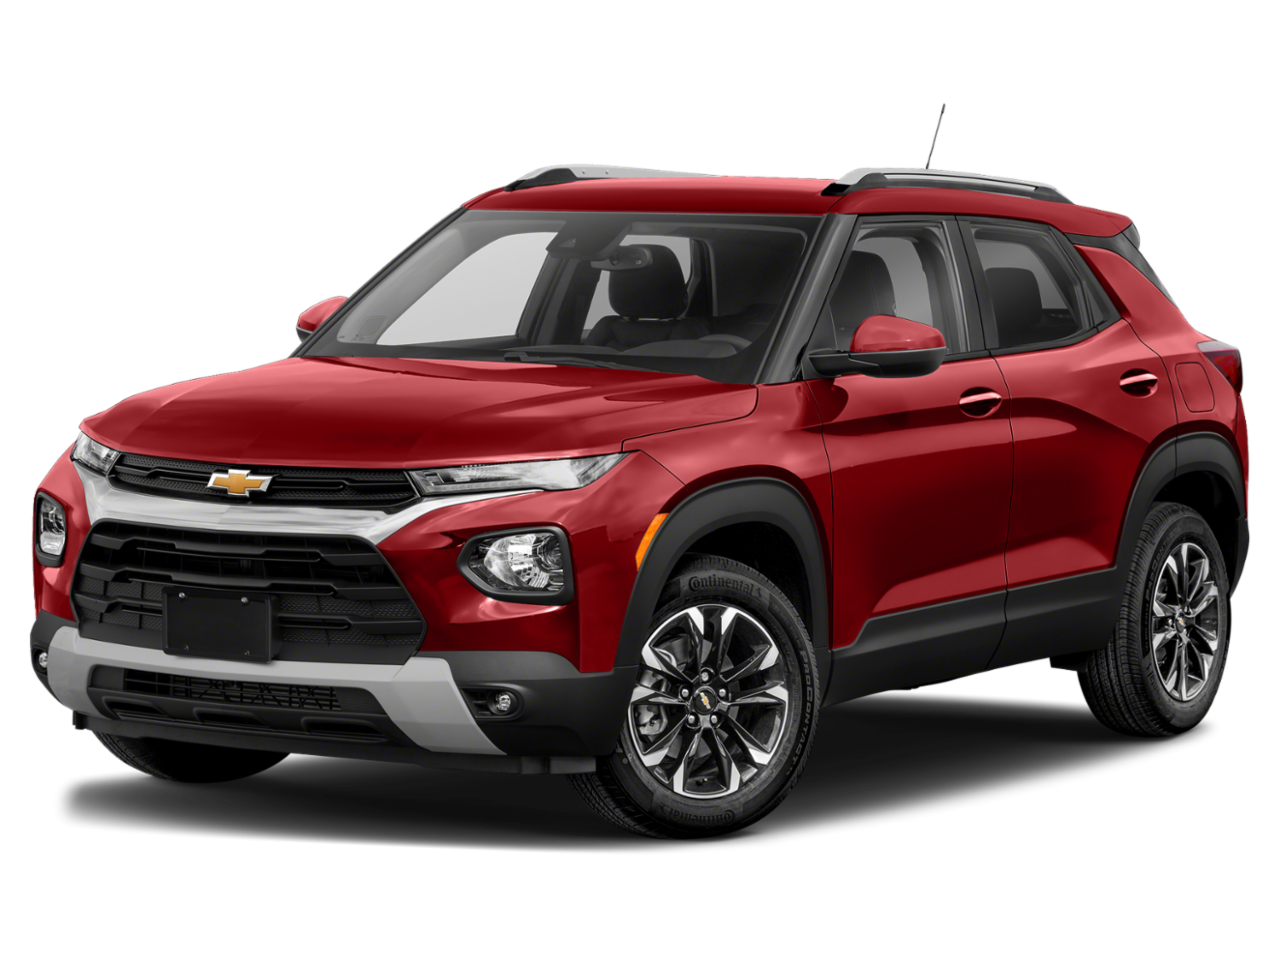 Specials And Discounts At Paul Masse Chevrolet In E Providence